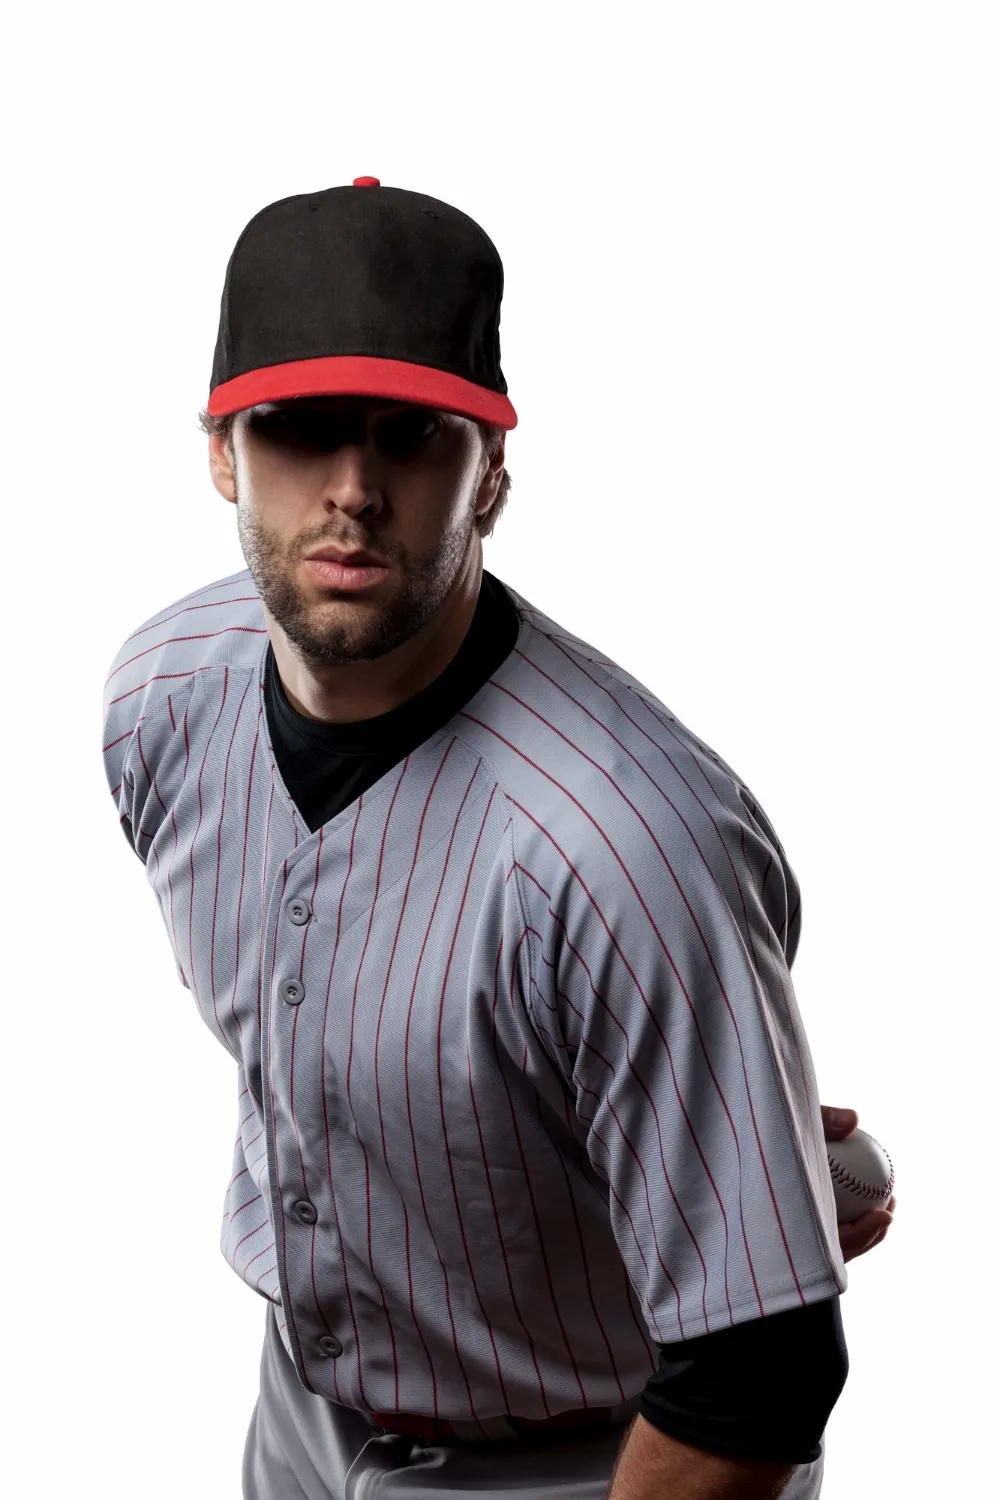 Baseball player in red uniform